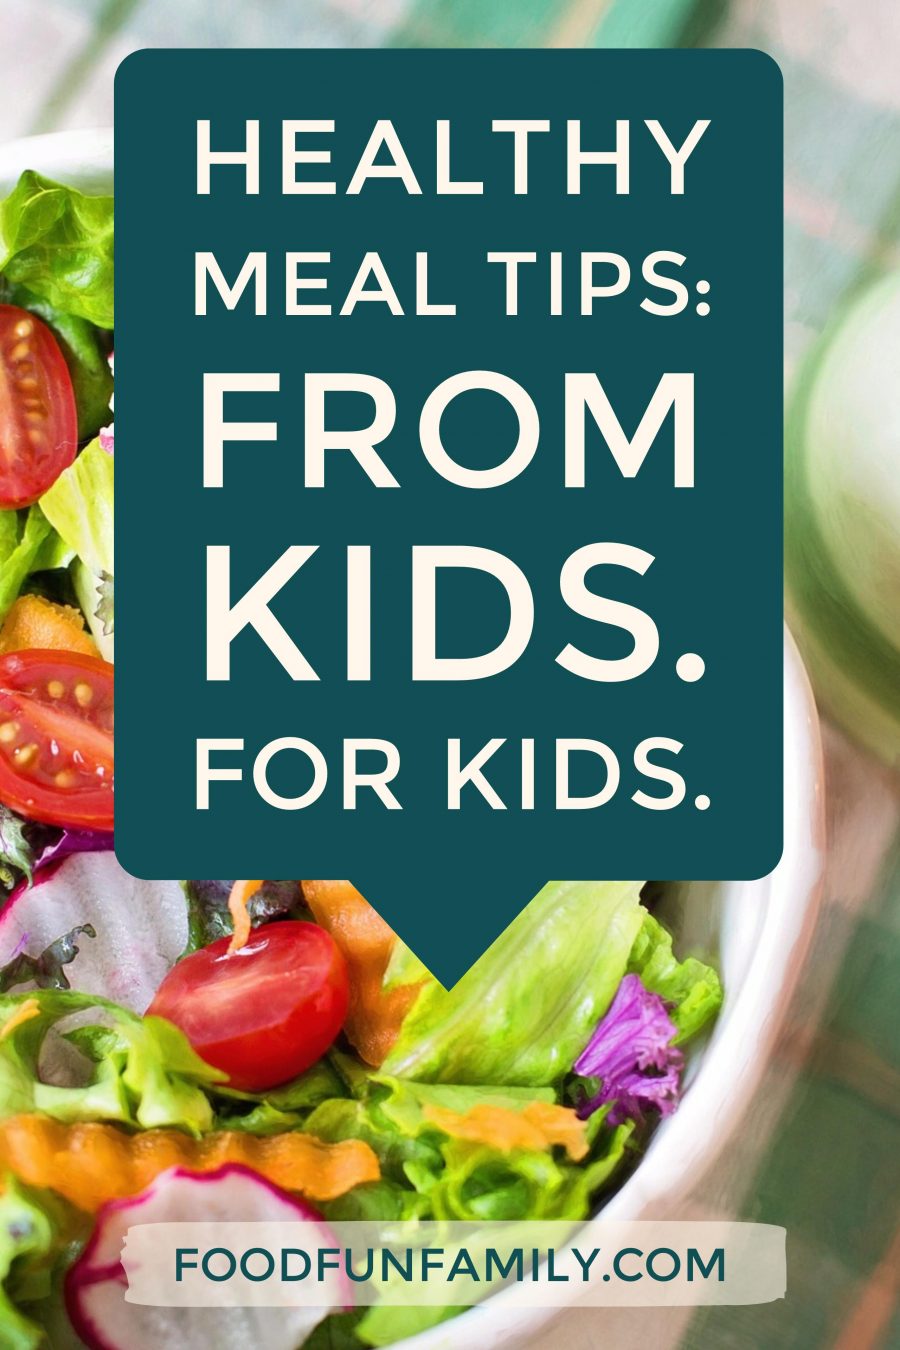 Healthy meal tips...from kids, for kids. Lots of tips from the kids about how to make better choices when eating meals and snacking.